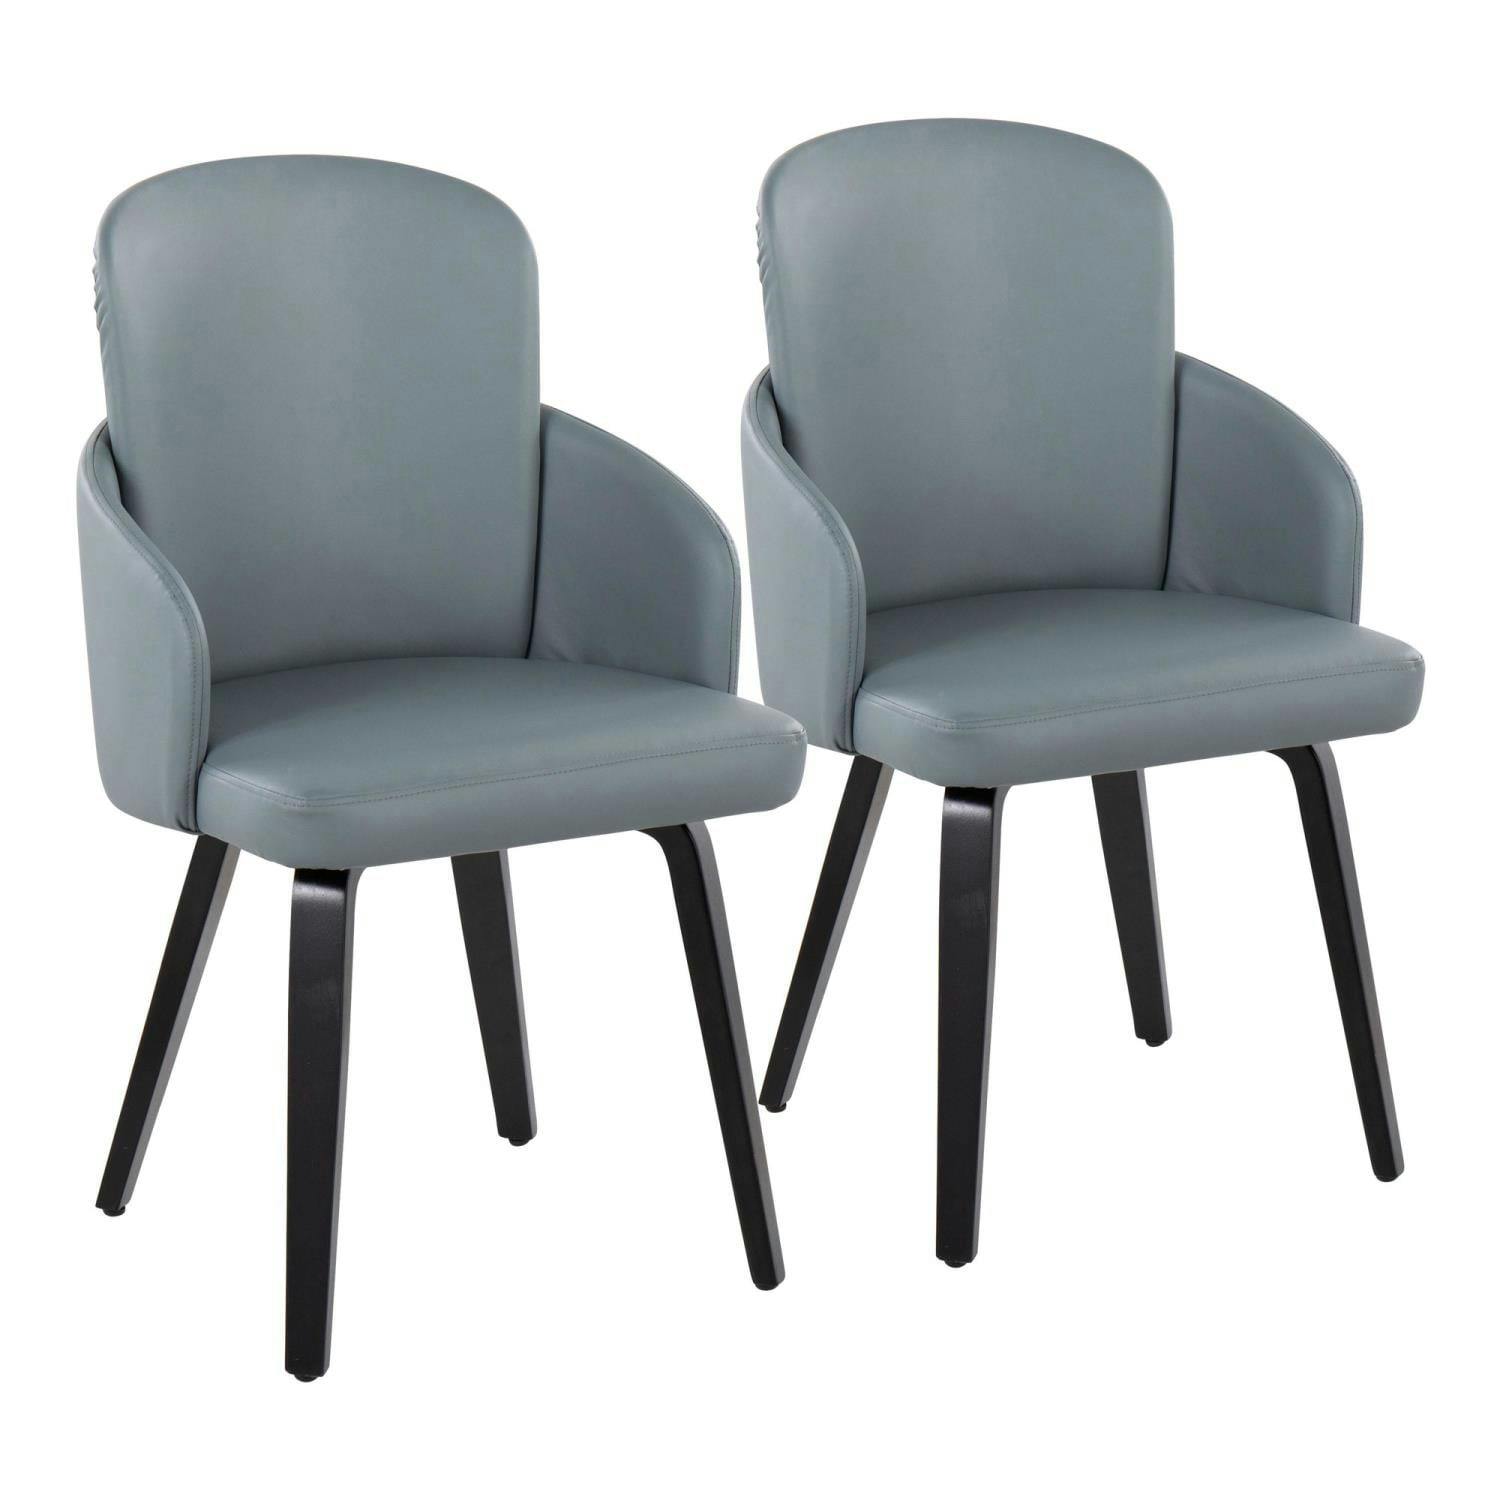 Elegant Dahlia Dark Gray Faux Leather Upholstered Side Chair with Black Wood and Chrome Accents